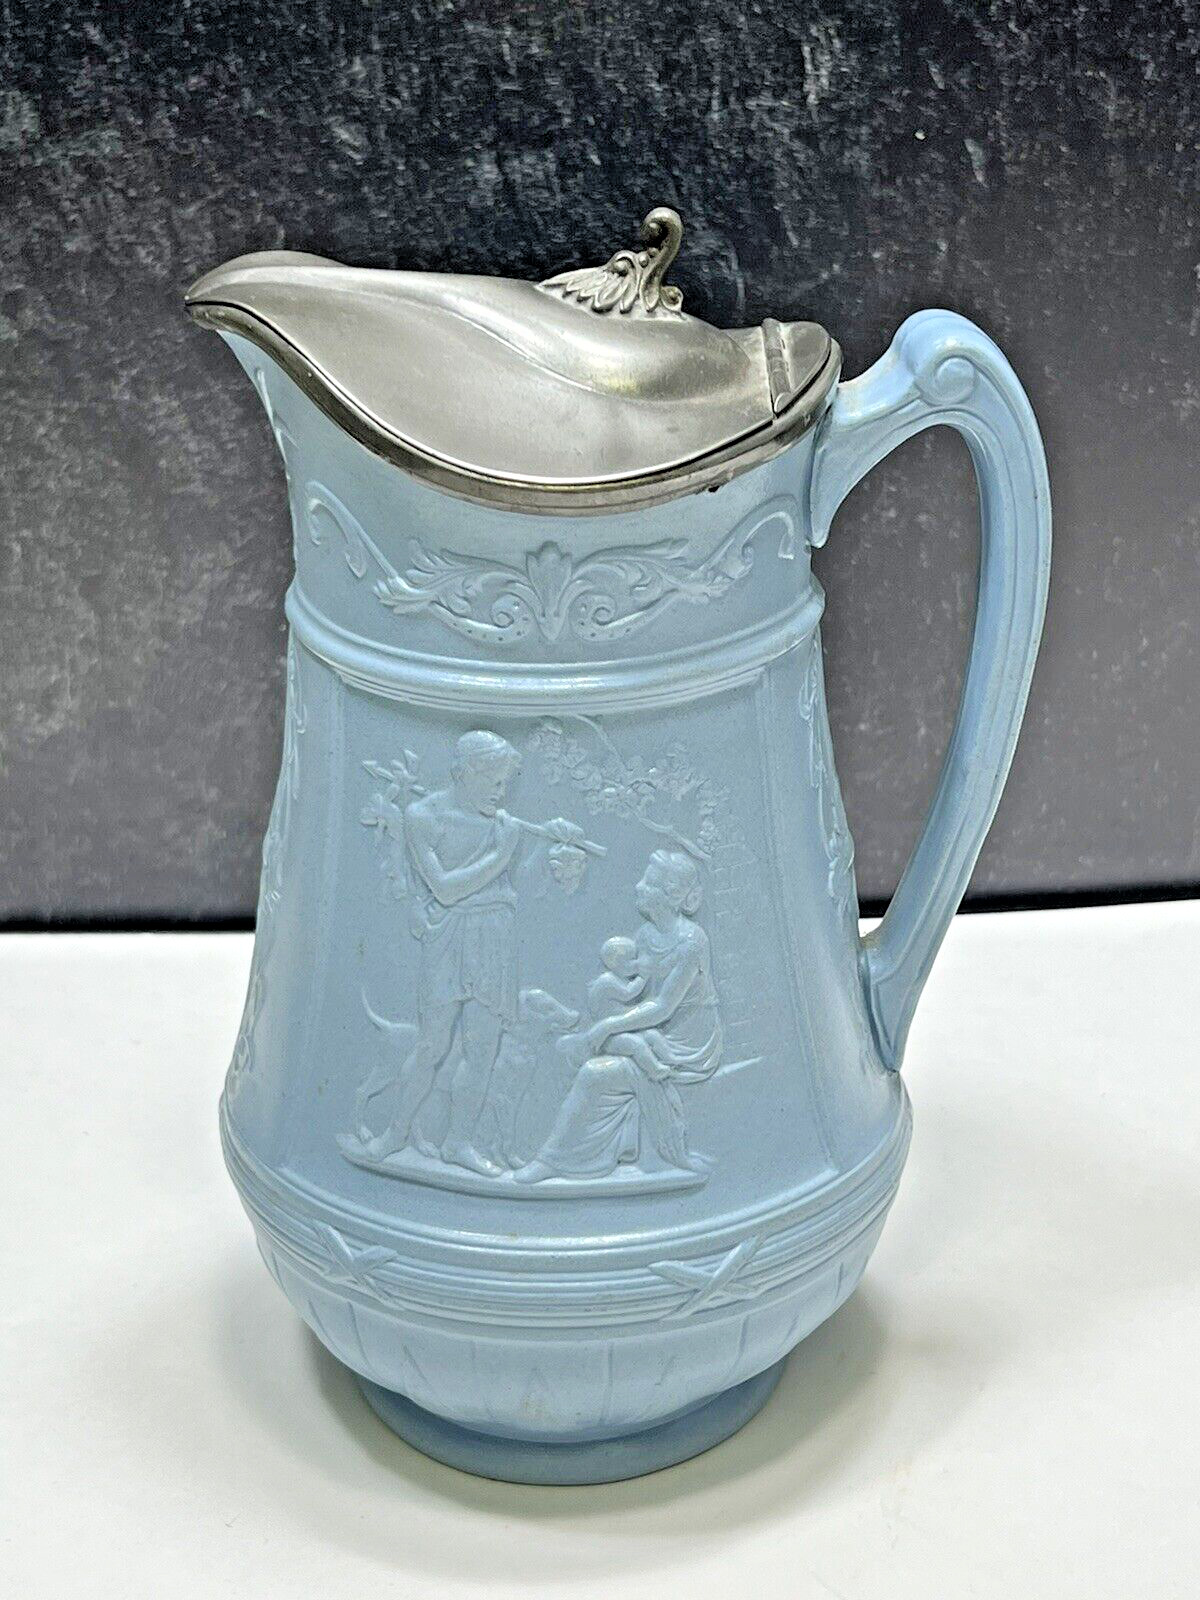 Antique Relief Molded Pitcher Jug Drabware Pewter Hinged LId Old & Young Couple